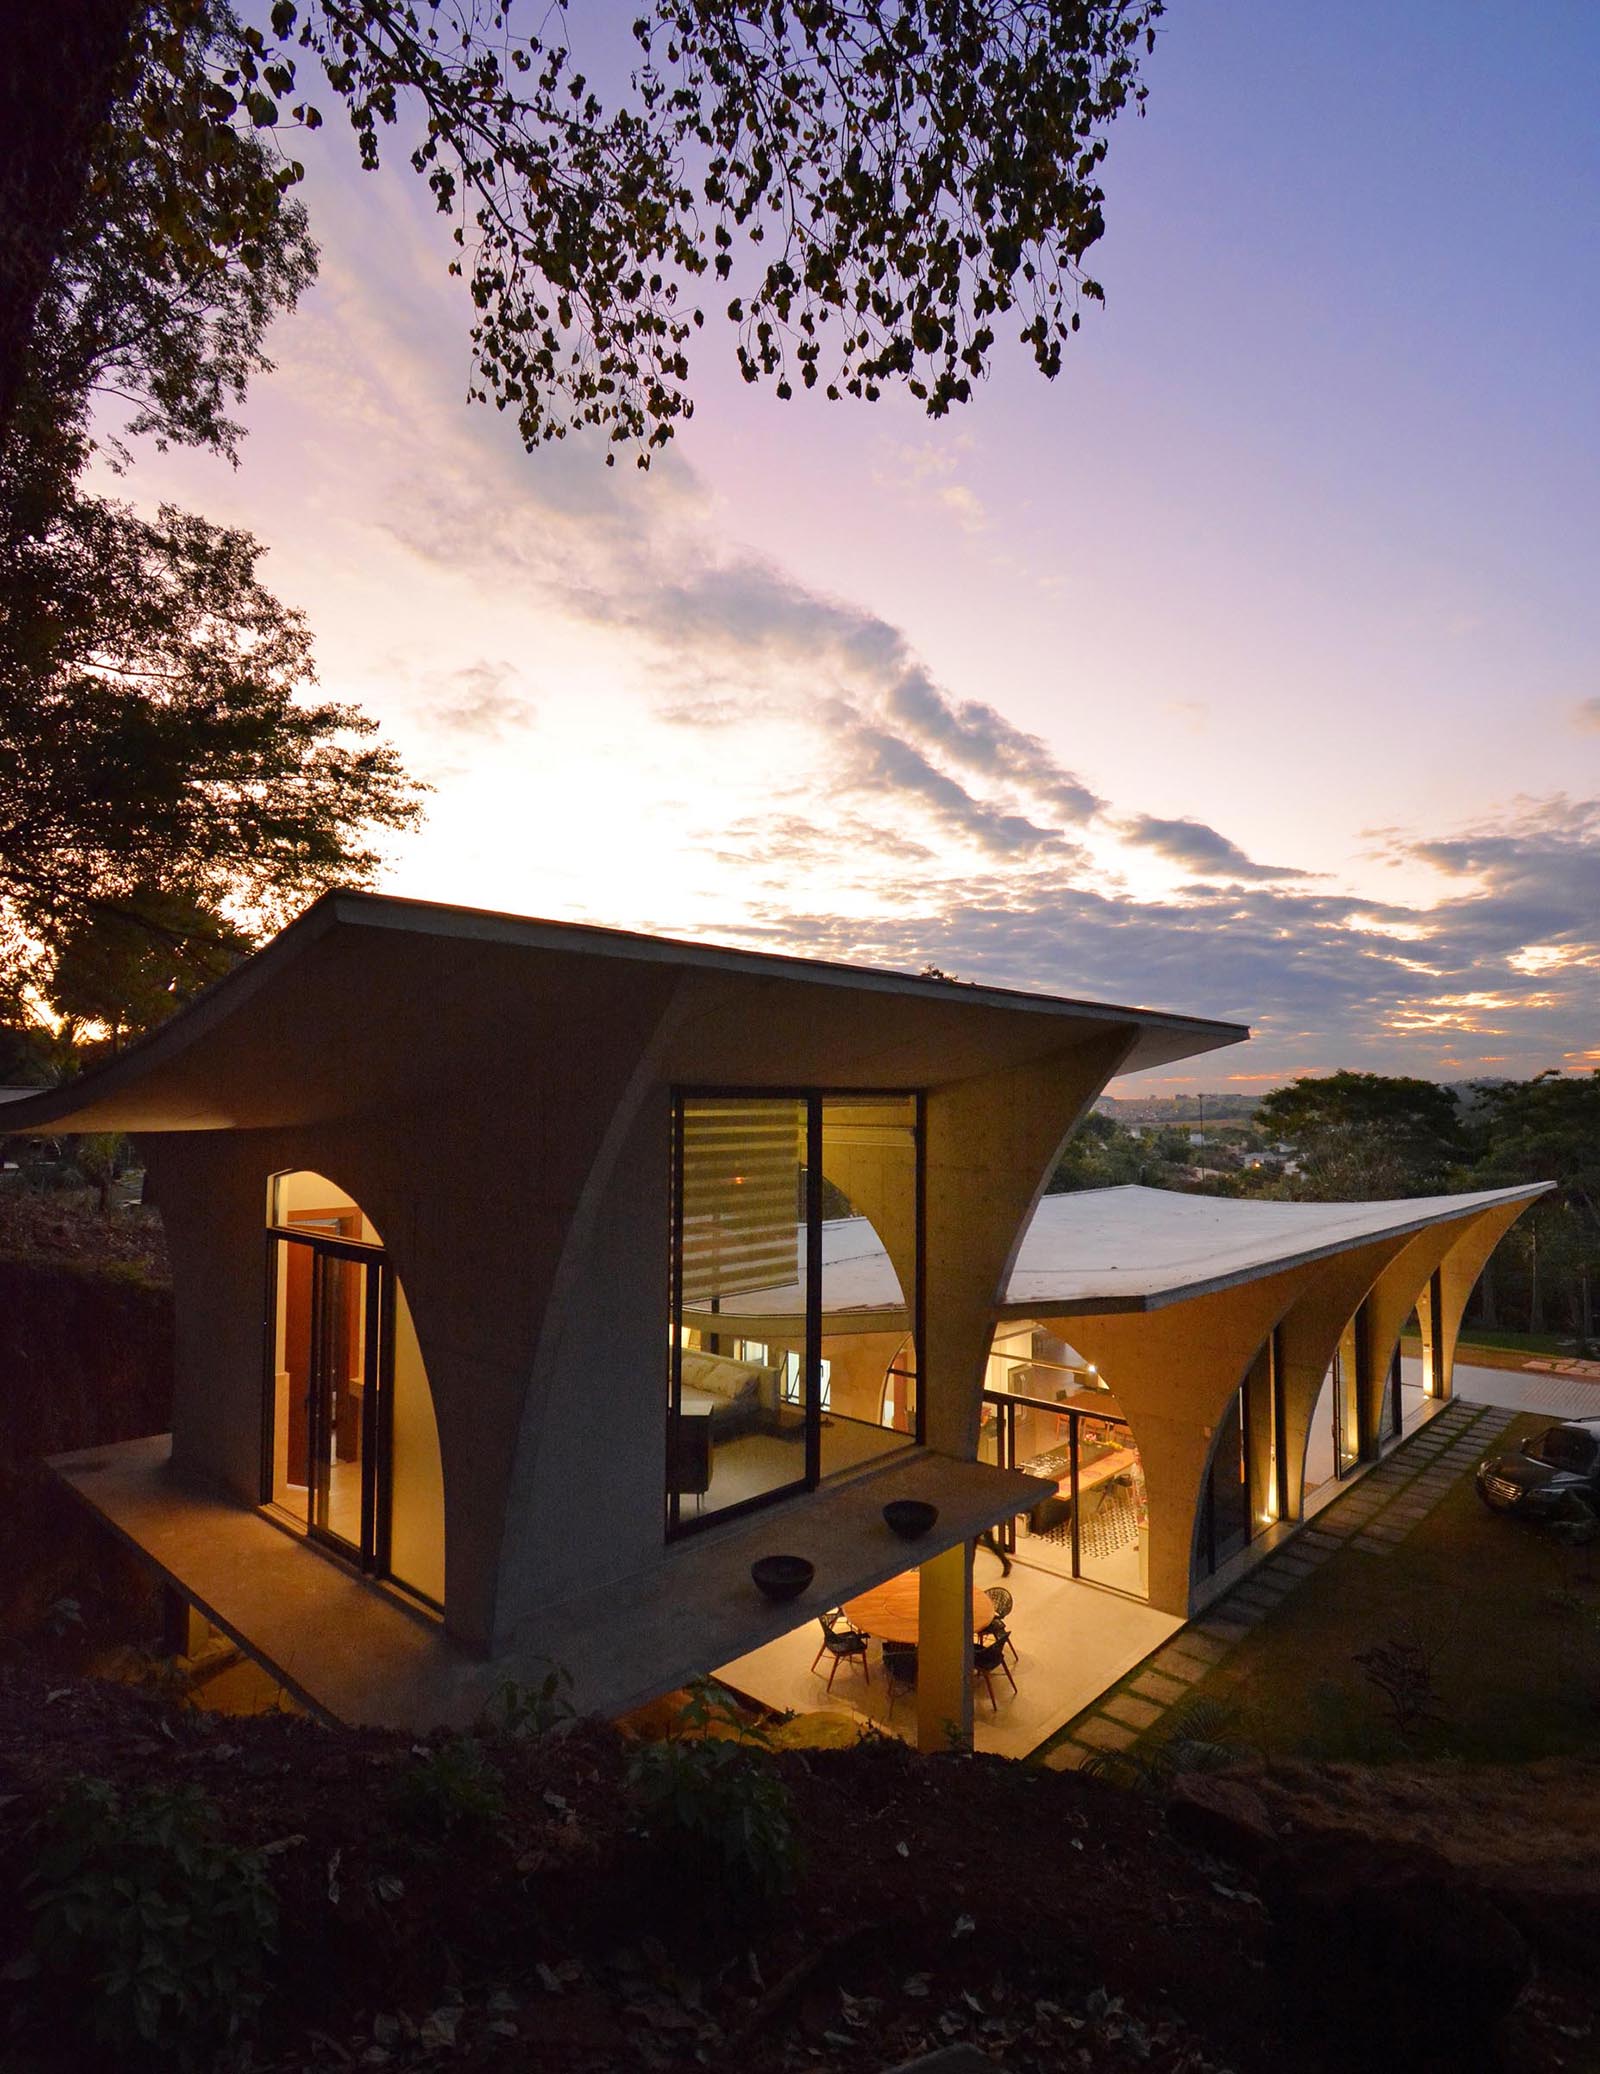 This modern concrete home features numerous arches, which are especially visible at night as the interior light highlights the curves.